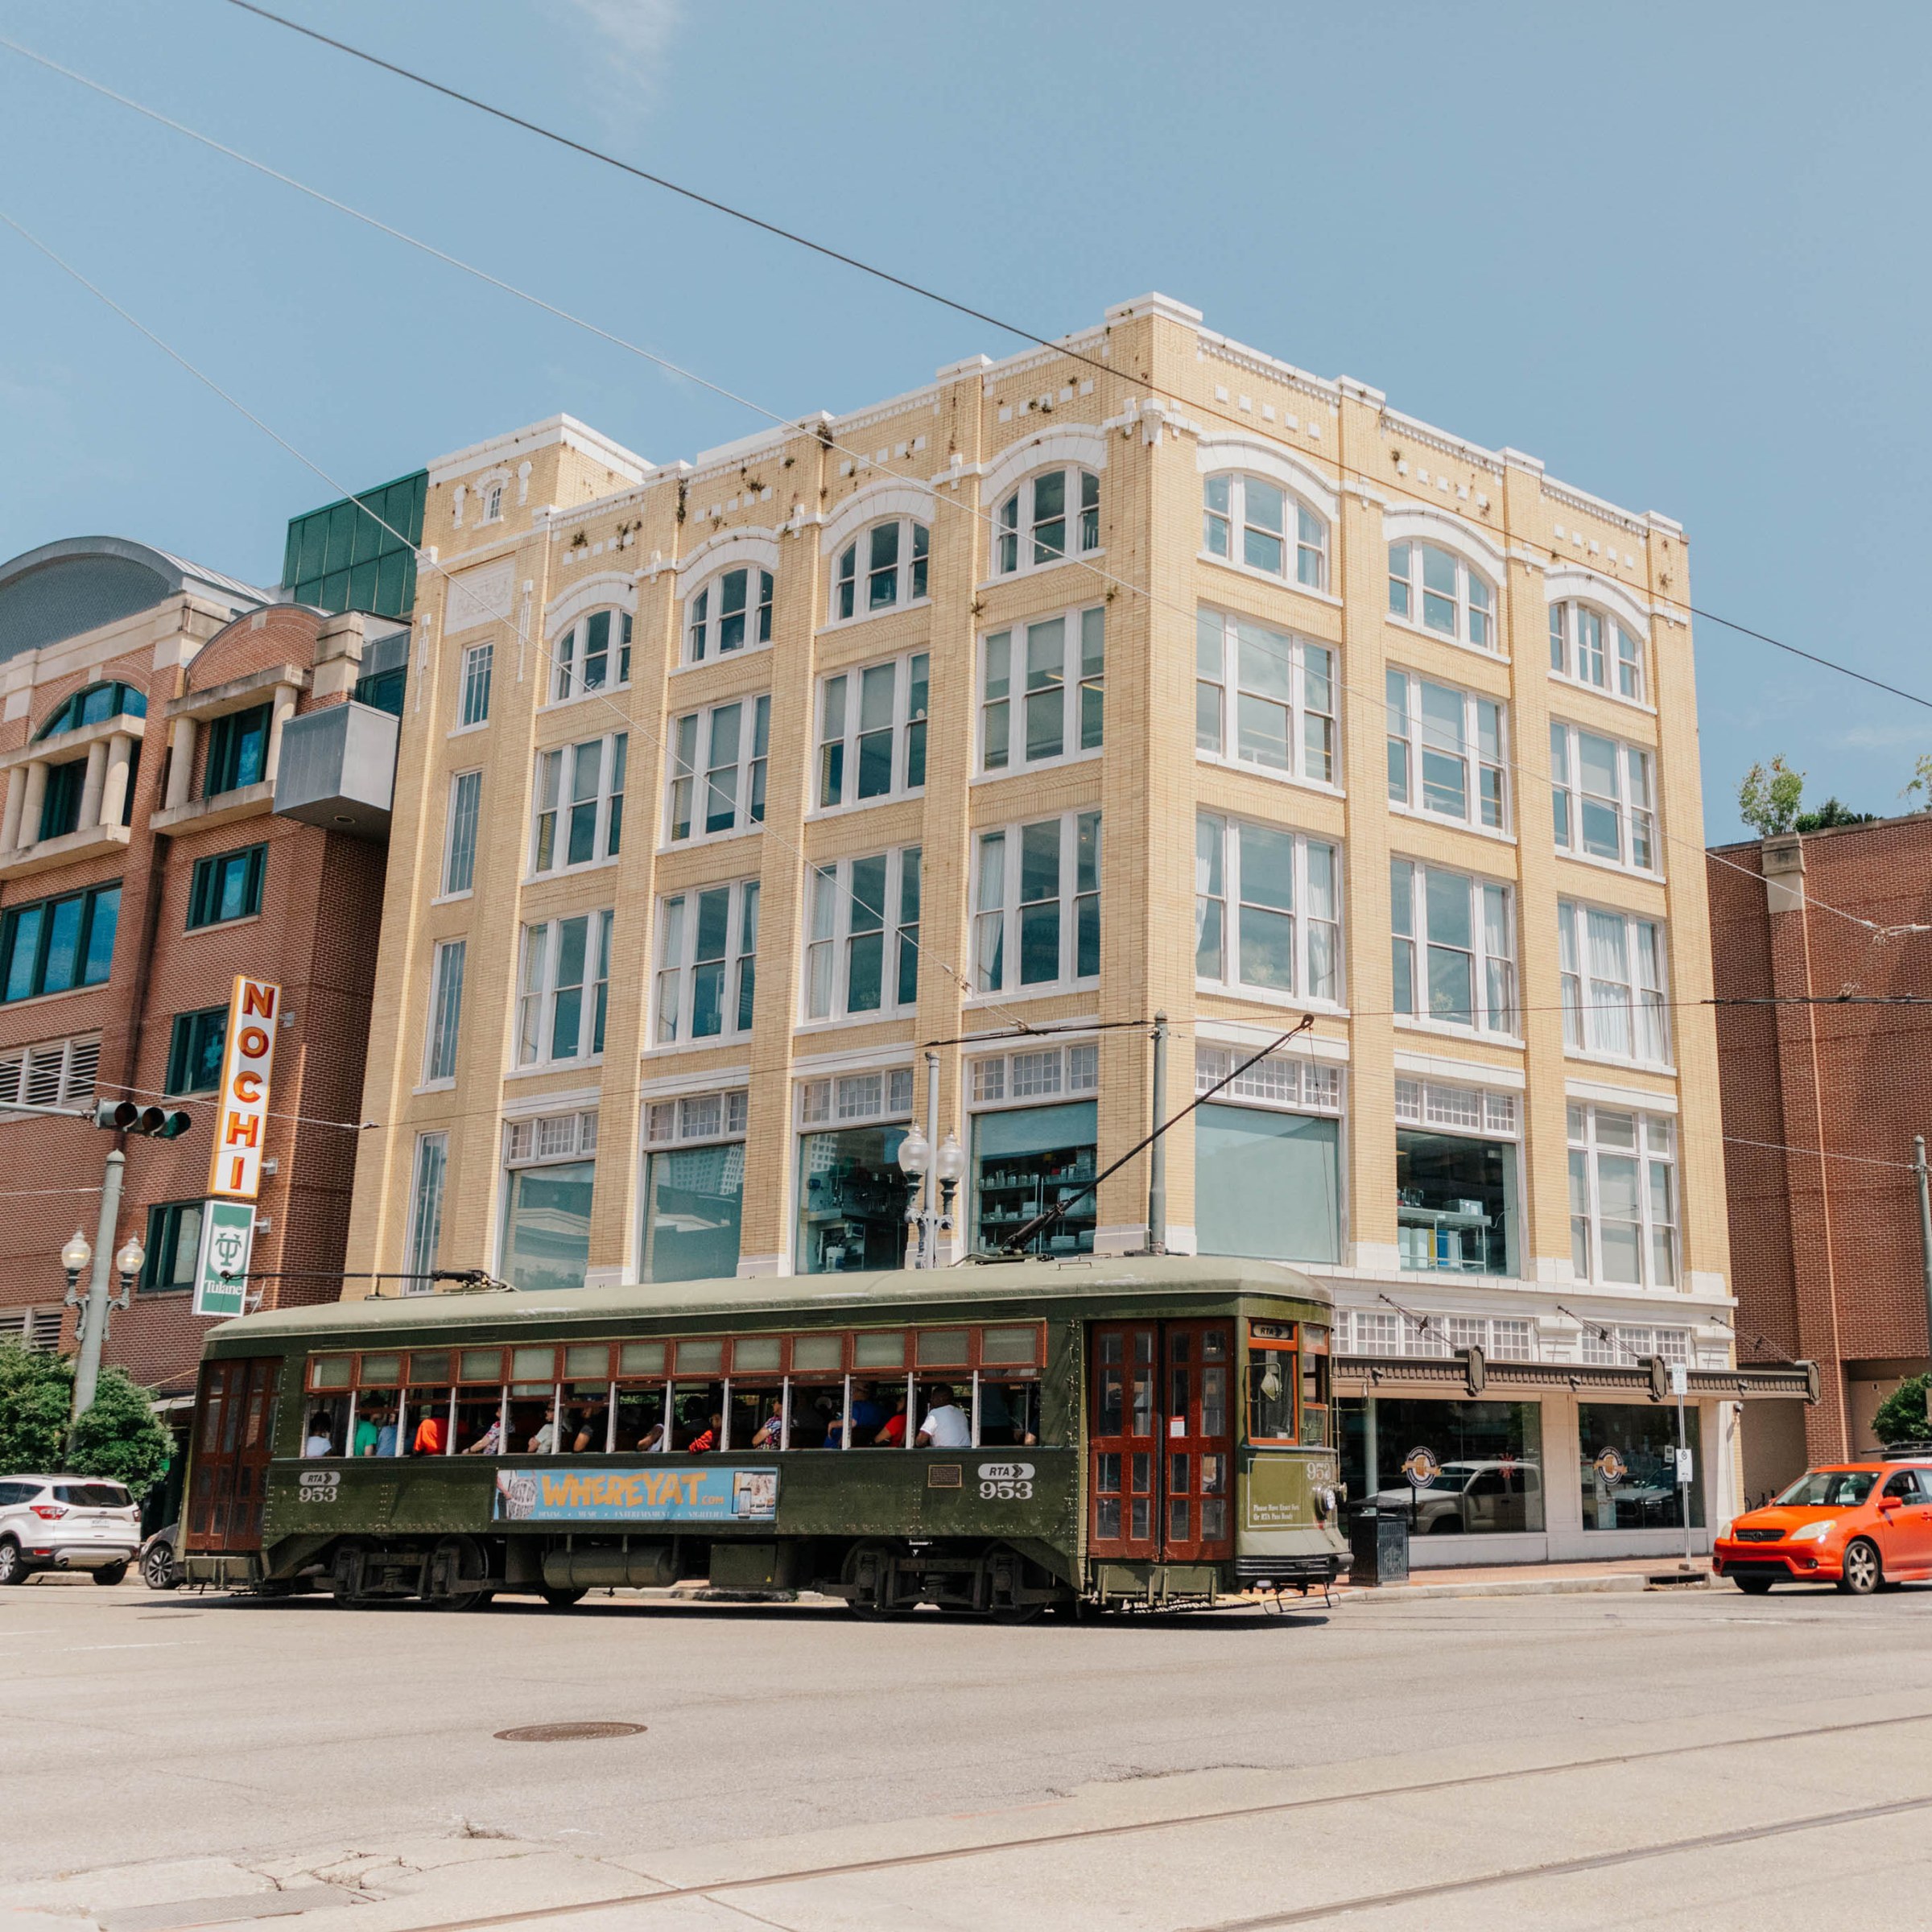 Exterior of five-story building on a corner in a downtown setting with a streetcar passing in the foreground